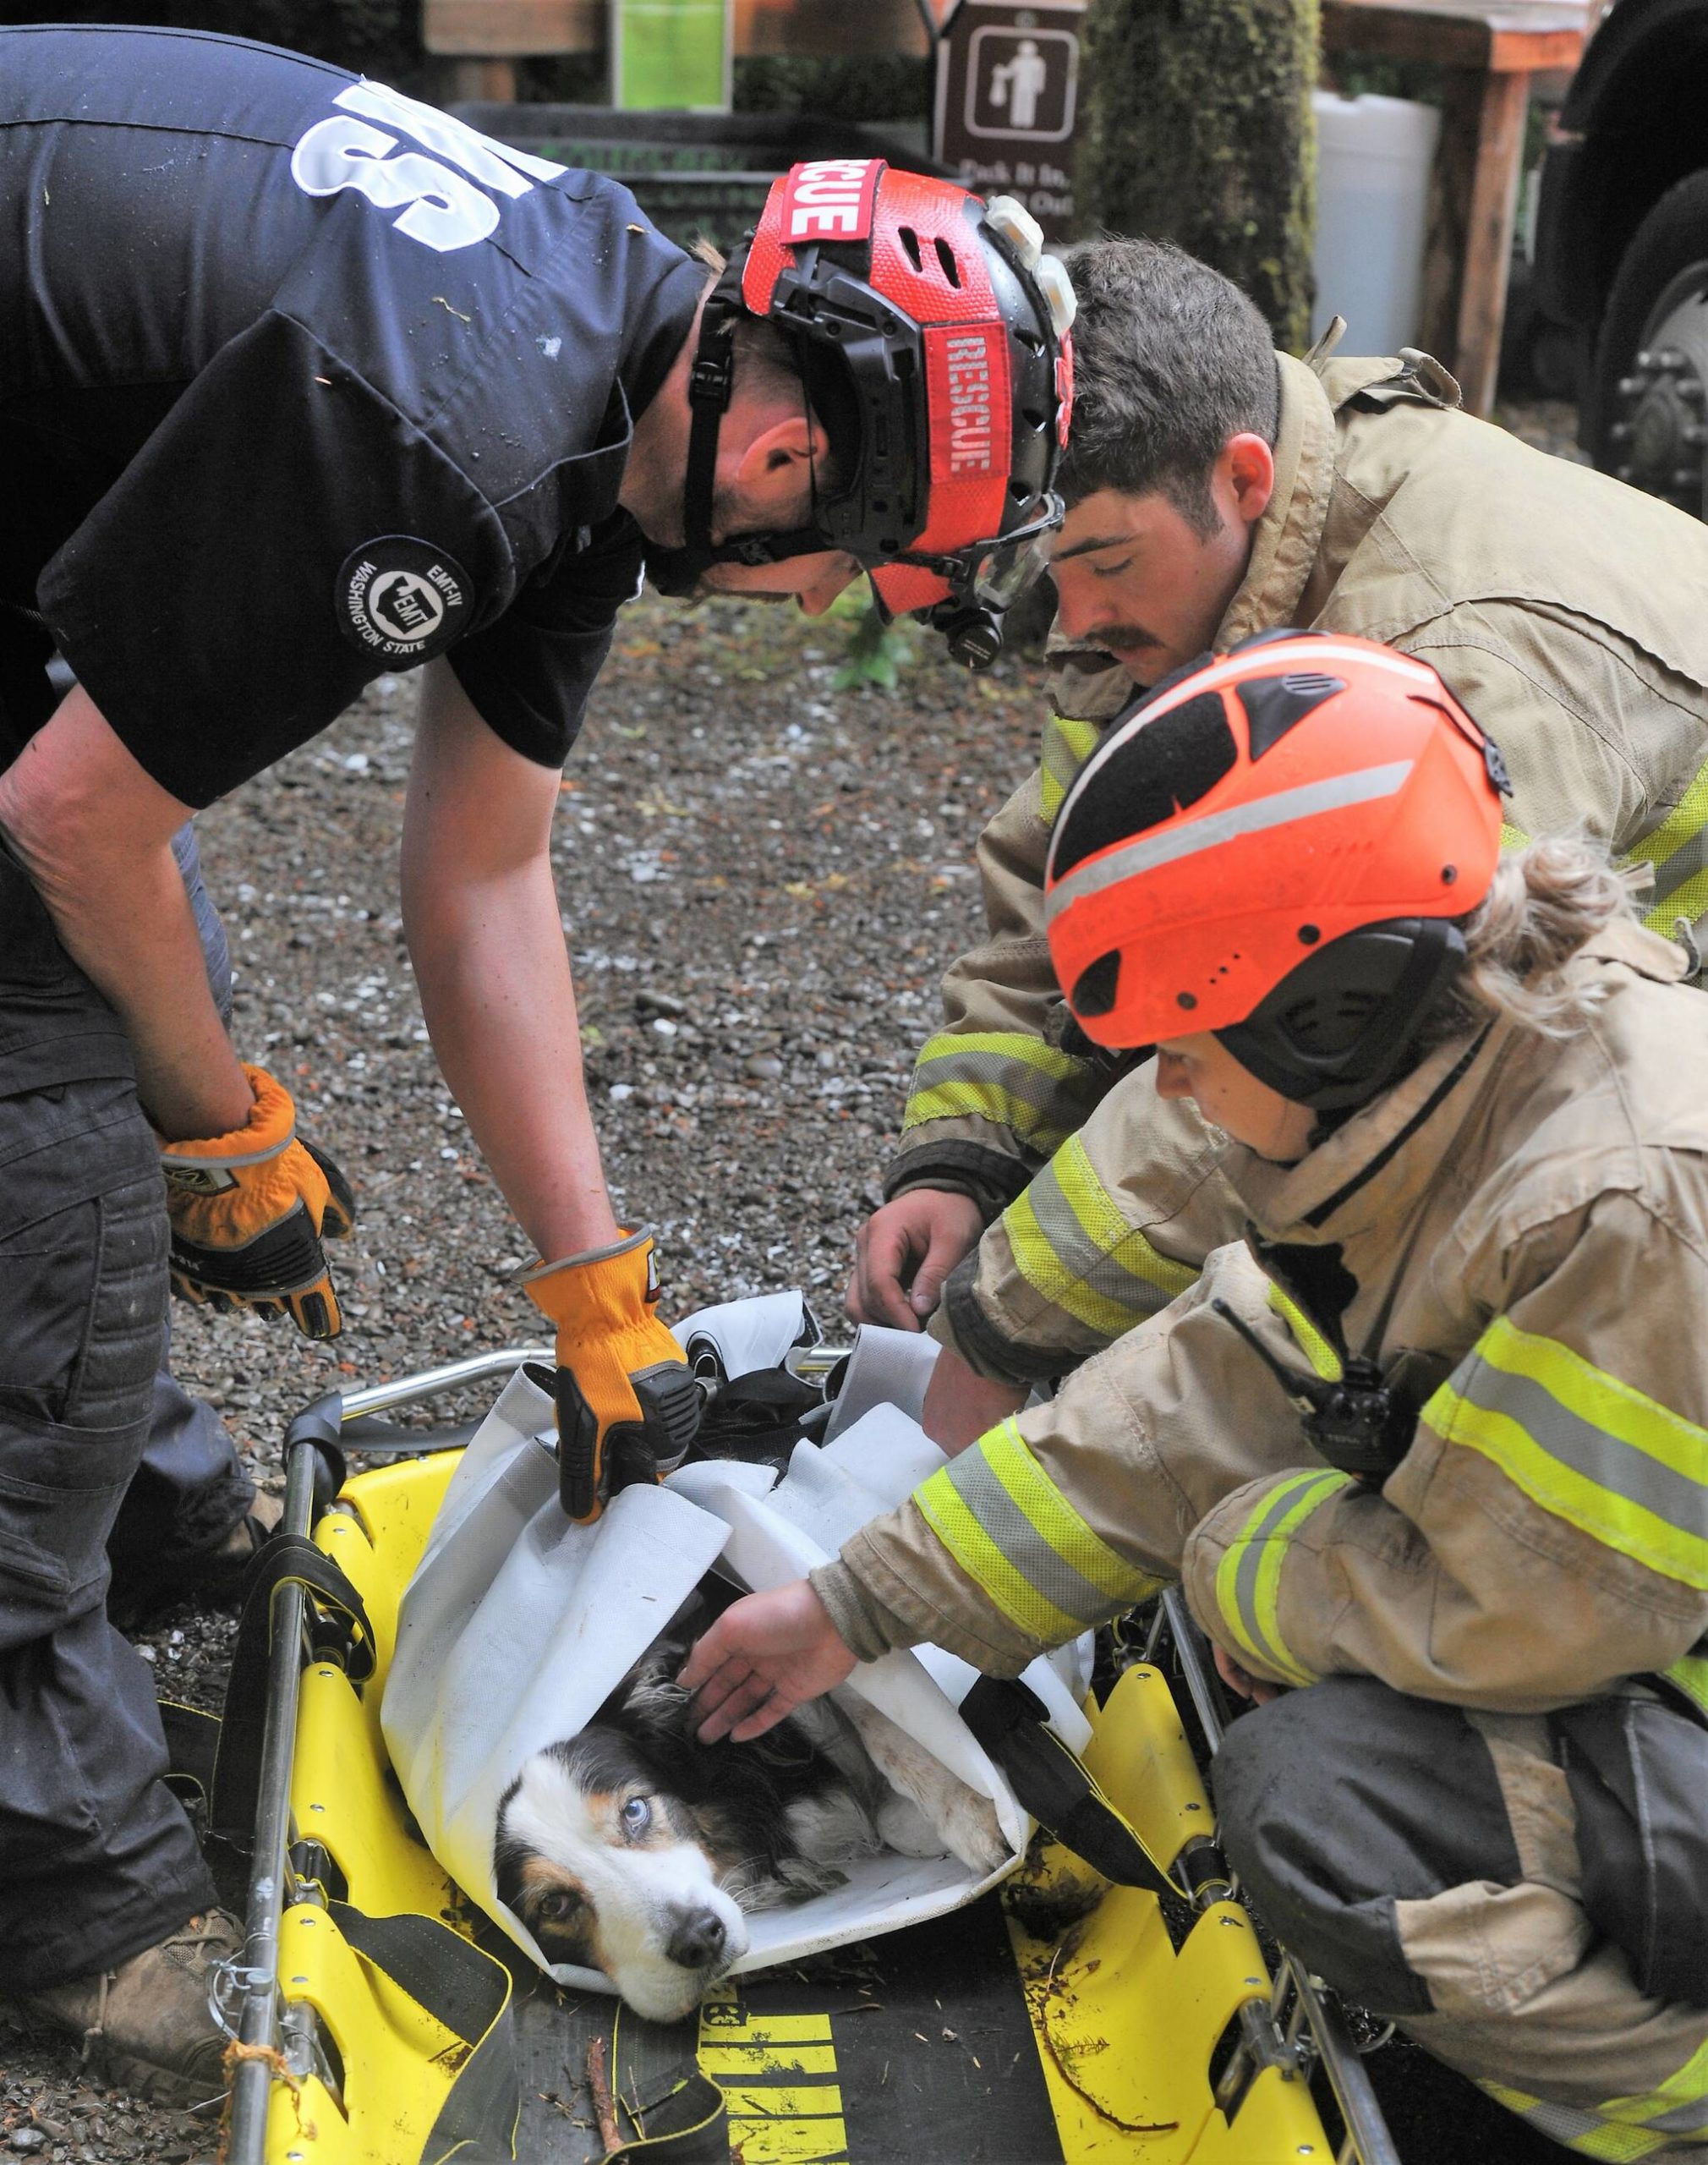 Firemen prepare to load the dog into a vehicle after its rescue from the banks of the Sol Duc River. Photo by Lonnie Archibald